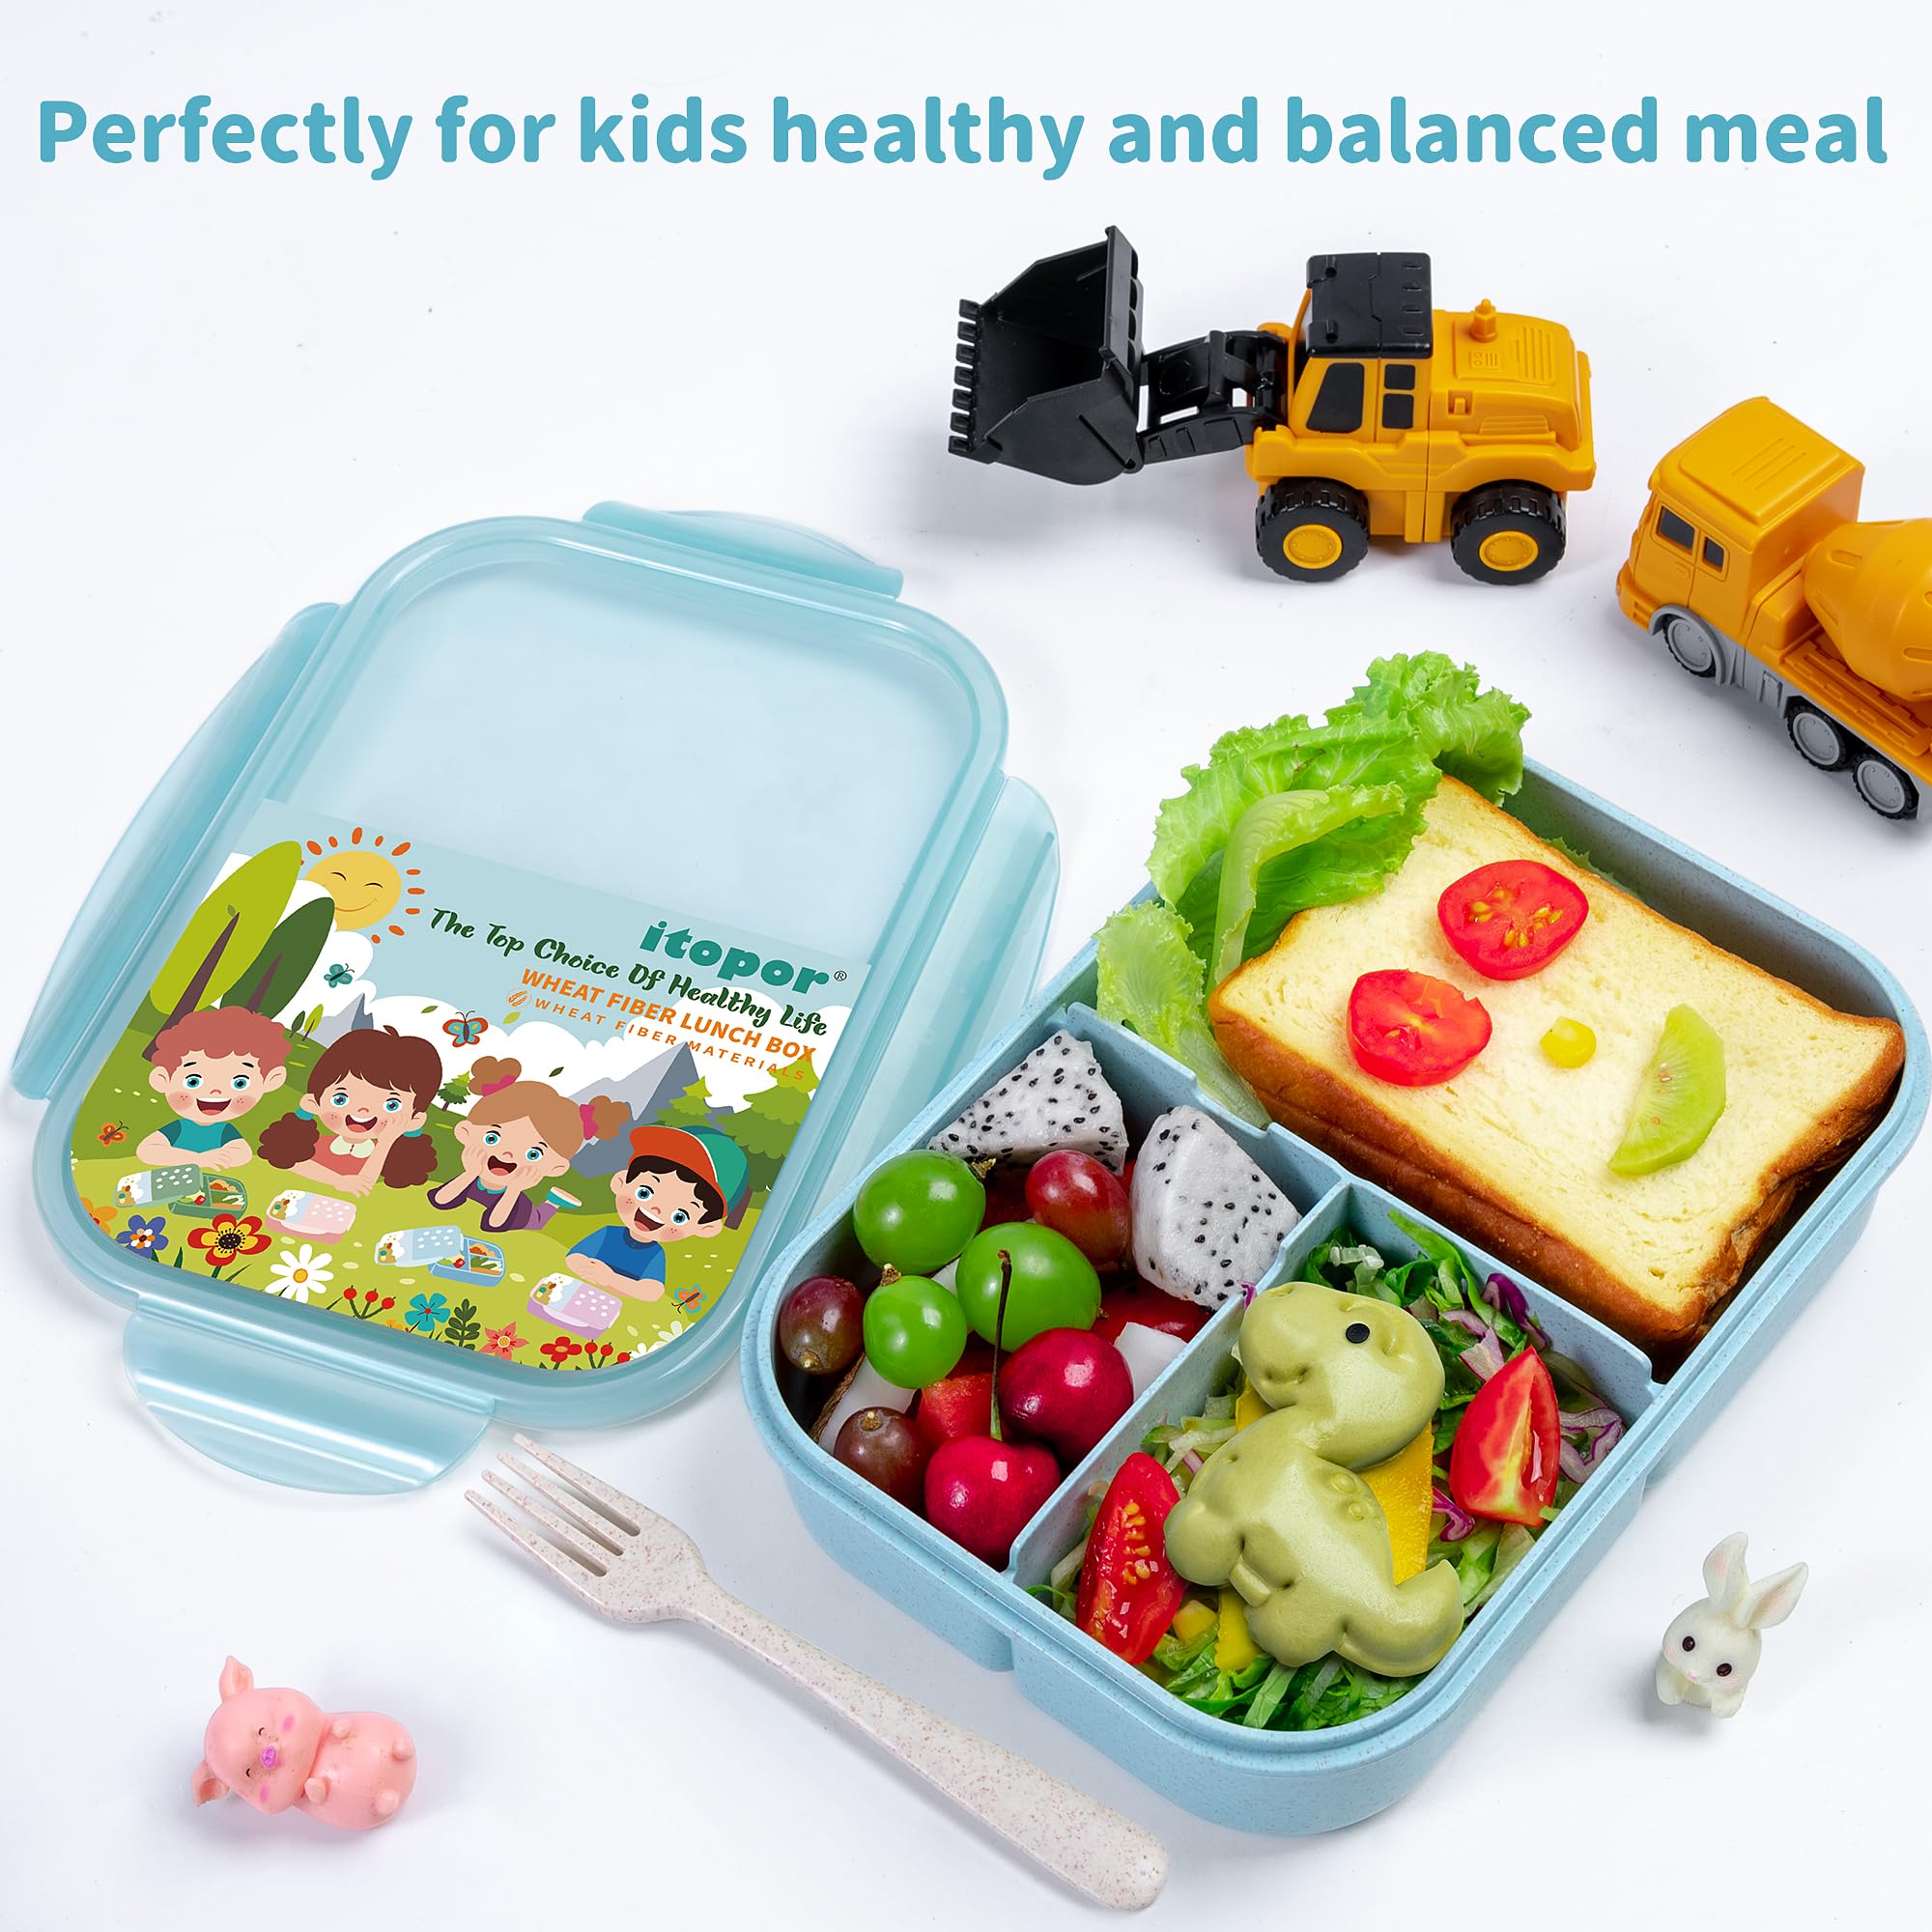 Itopor® Lunch Box,Ideal Leak-Proof Bento Box for Kids & Adults,Natural Wheat Fiber Material,Mom's Eco-Friendly Choice,Kids Lunch Box No BPA & Dyes,Healthy Food-Safe Lunch Container for Family(Blue)